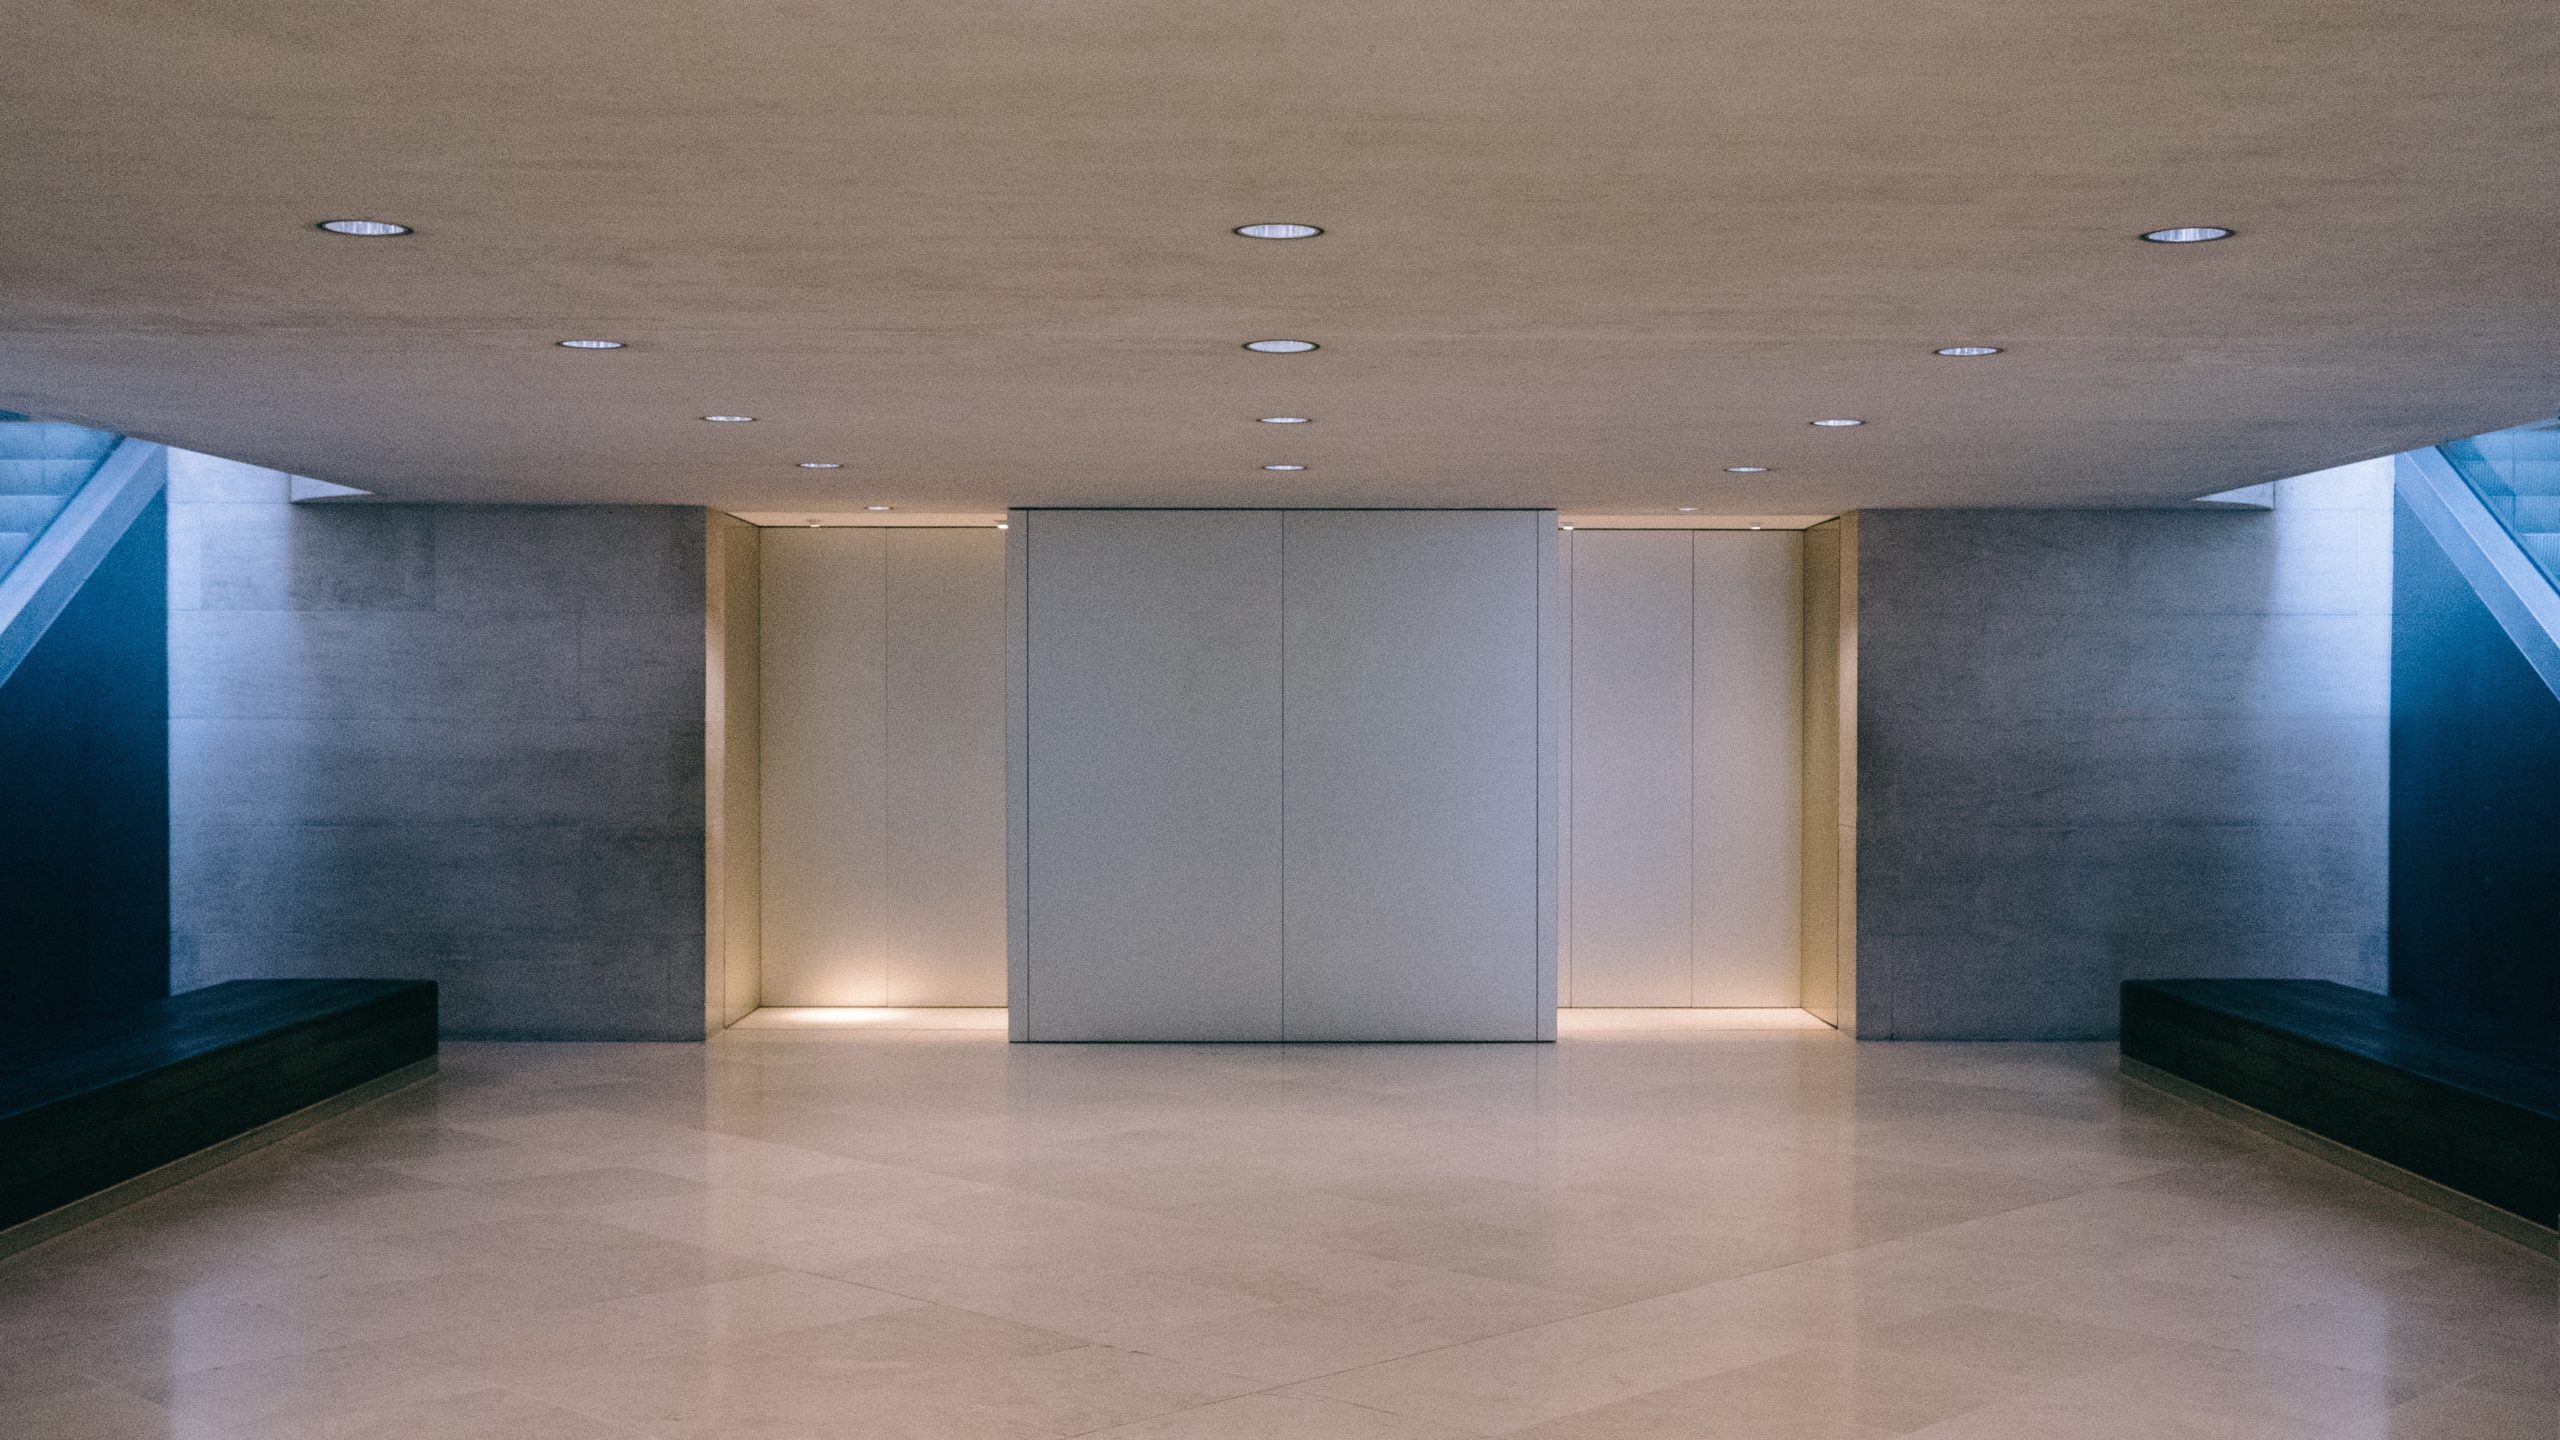 White elevators in a lobby with belbien film